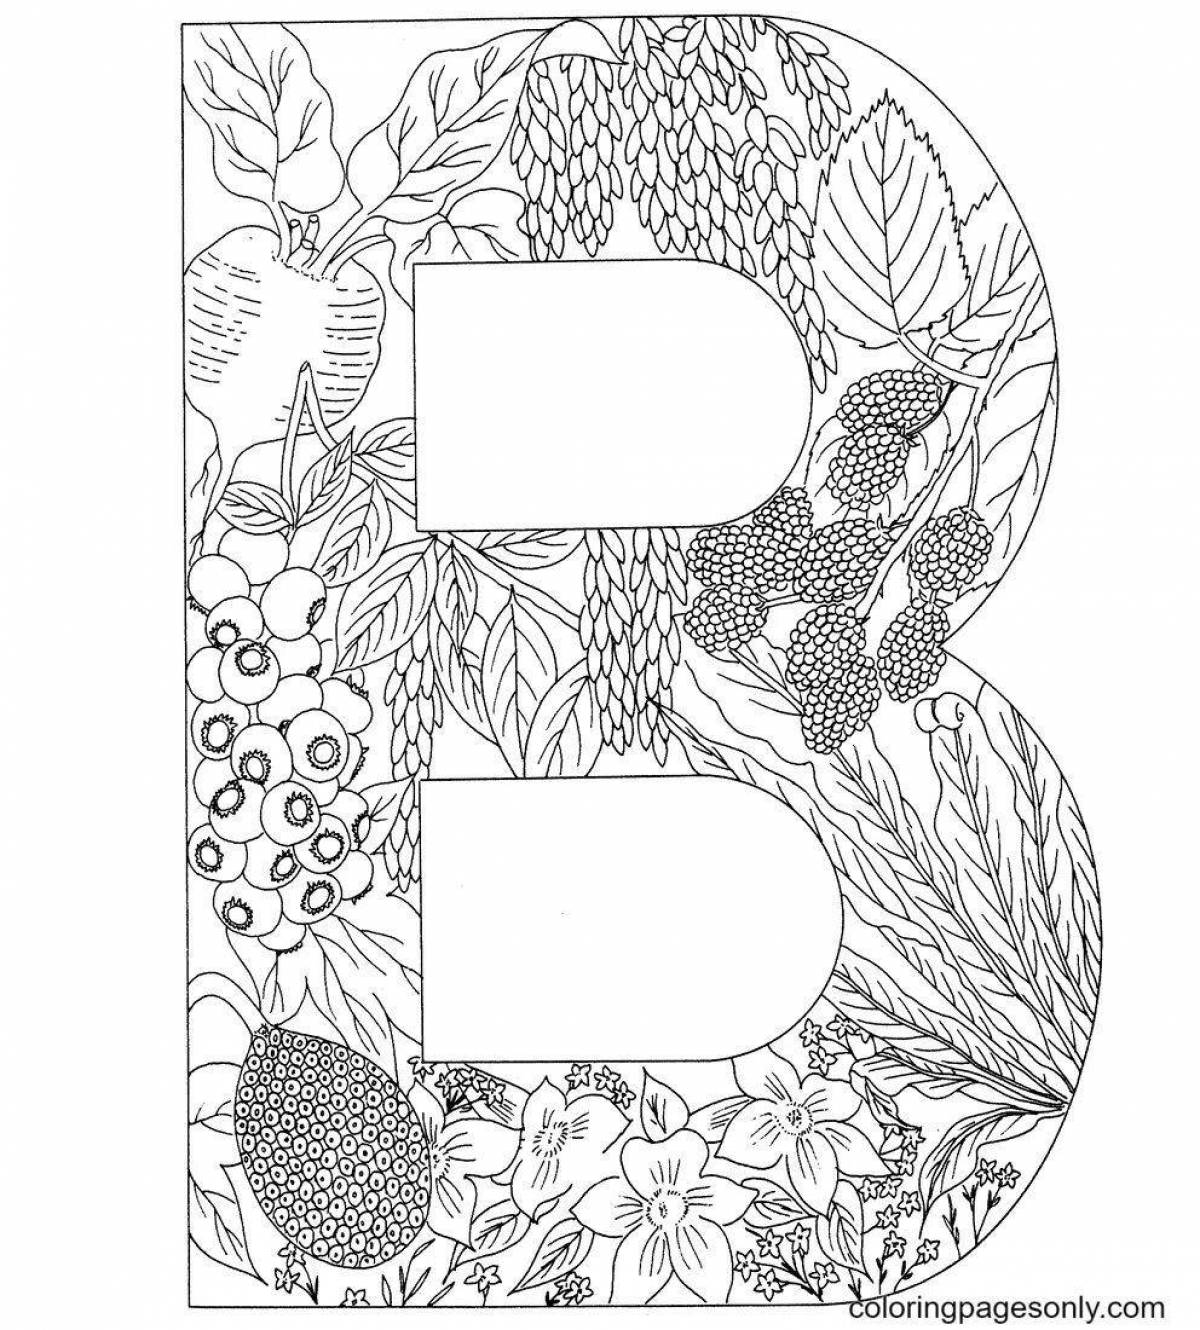 Exciting anti-stress coloring letters